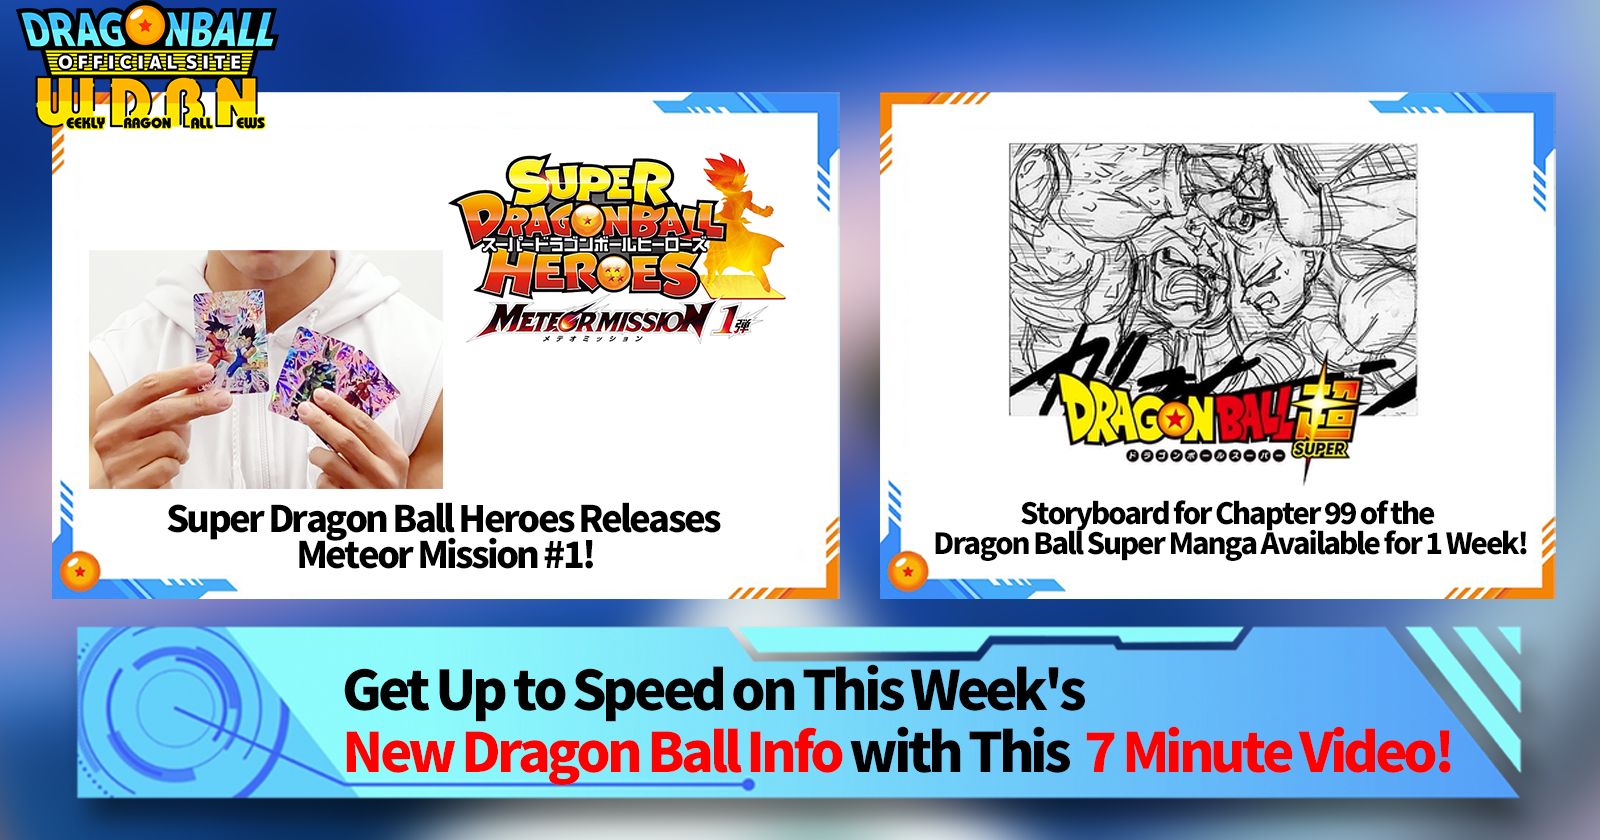 INFORMATION  DRAGON BALL:THE BREAKERS Official Website/ Bandai